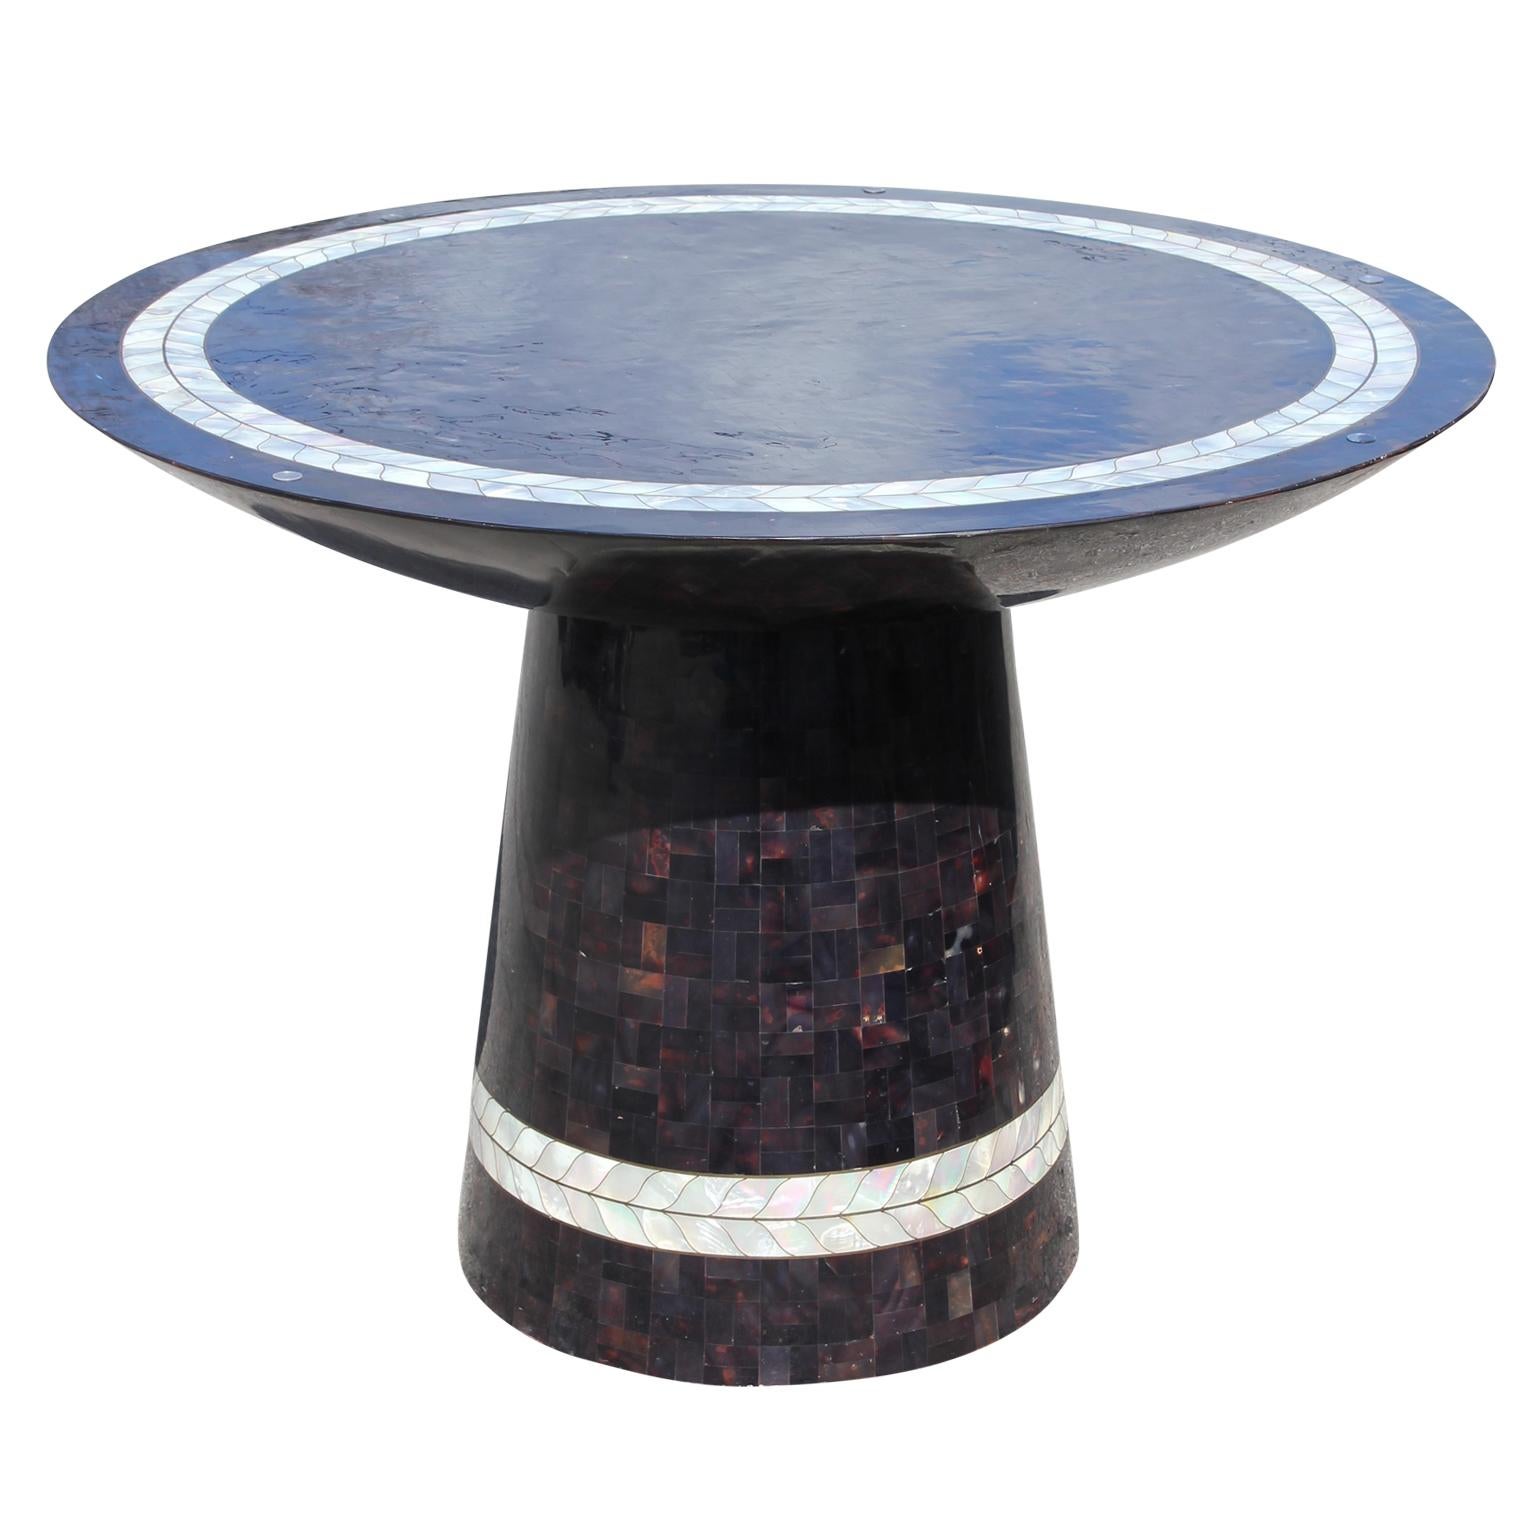 Attributed to Maitland Smith, this wonderful round pedestal dining table has a beautiful tessellated stone and pearl design. Superb quality and construction. It features a glass top that can be replaced with a larger size. Made in the the